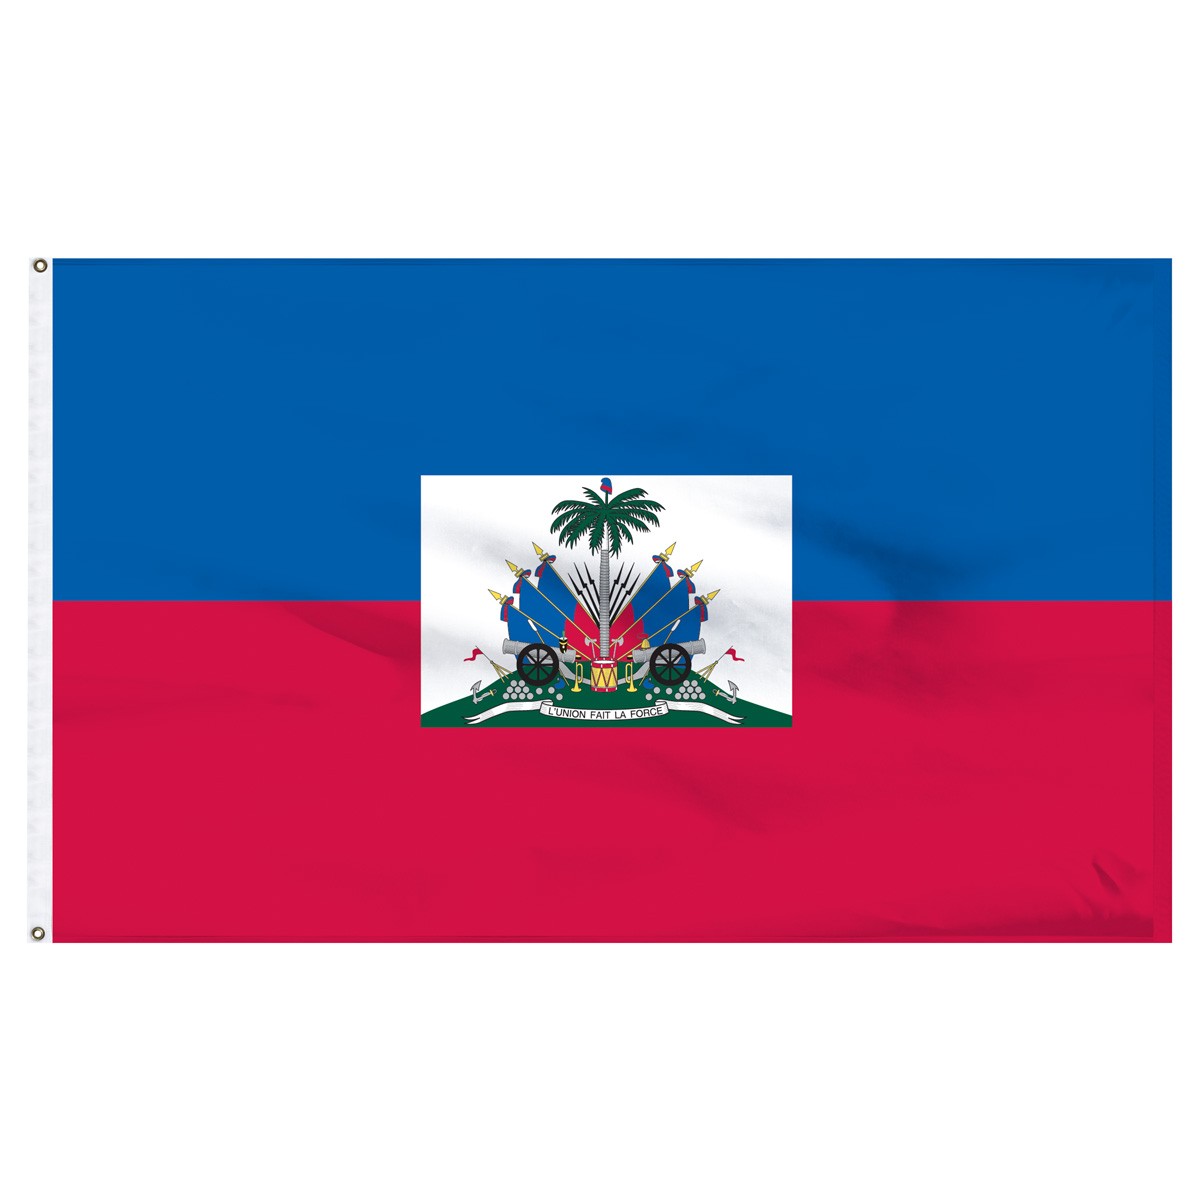 Haiti Submit Flags and Flags